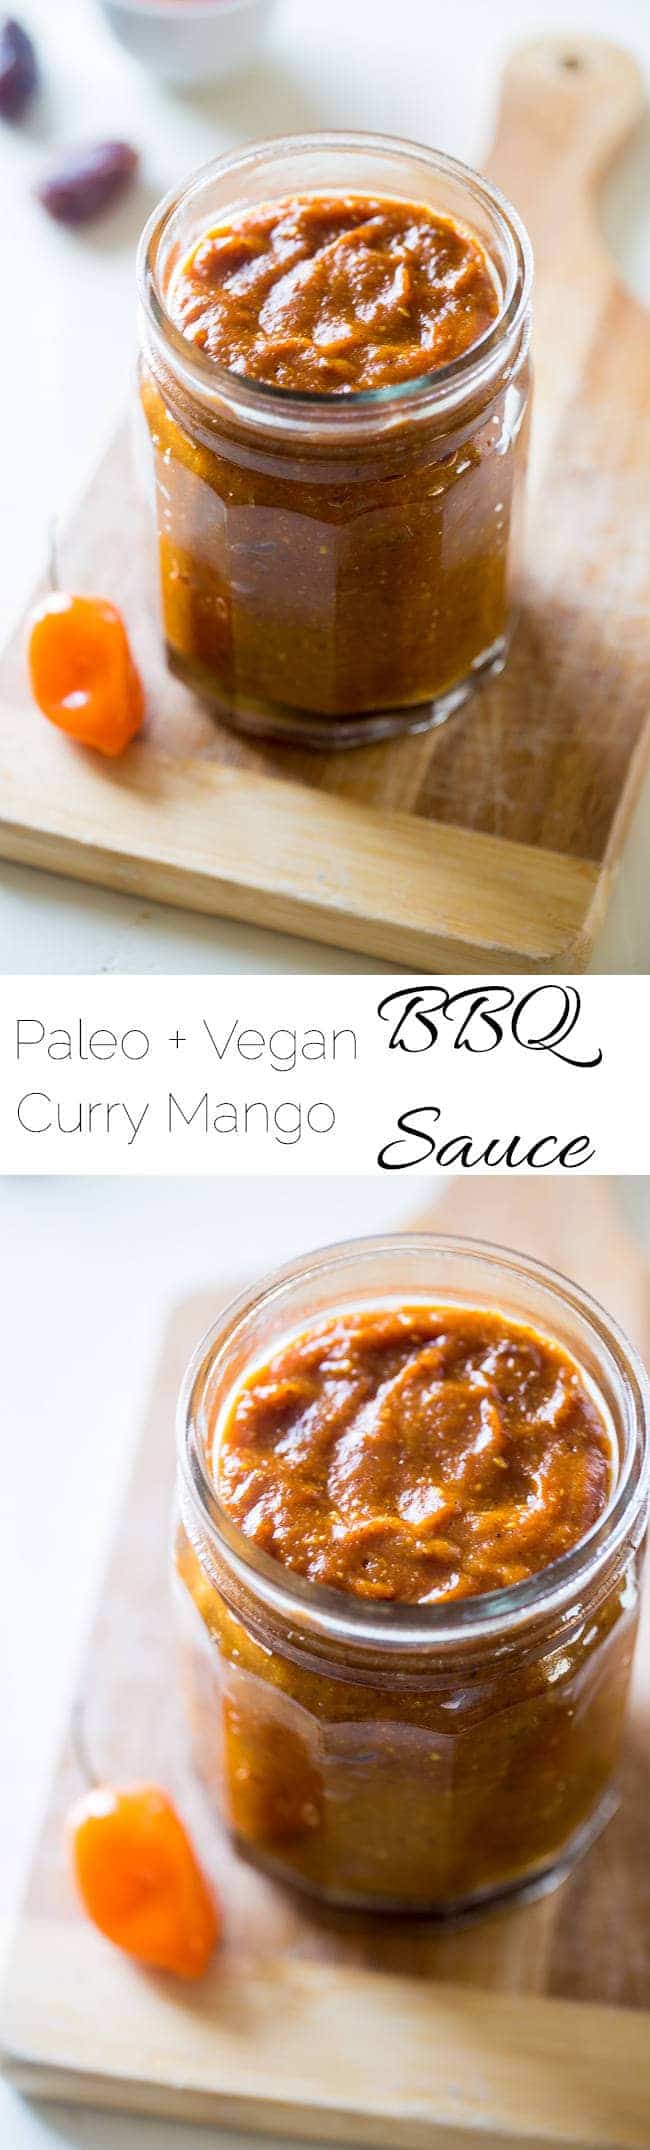 Mango Curry Easy Homemade Paleo BBQ Sauce - This homemade BBQ sauce is naturally sweetened with dates and mangoes, and has a spicy curry kick! It's quick, easy, Paleo/Vegan-friendly and so healthy! Perfect for summer! | #Foodfaithfitness | #Paleo #Vegan #Healthy #Glutenfree #Sugarfree